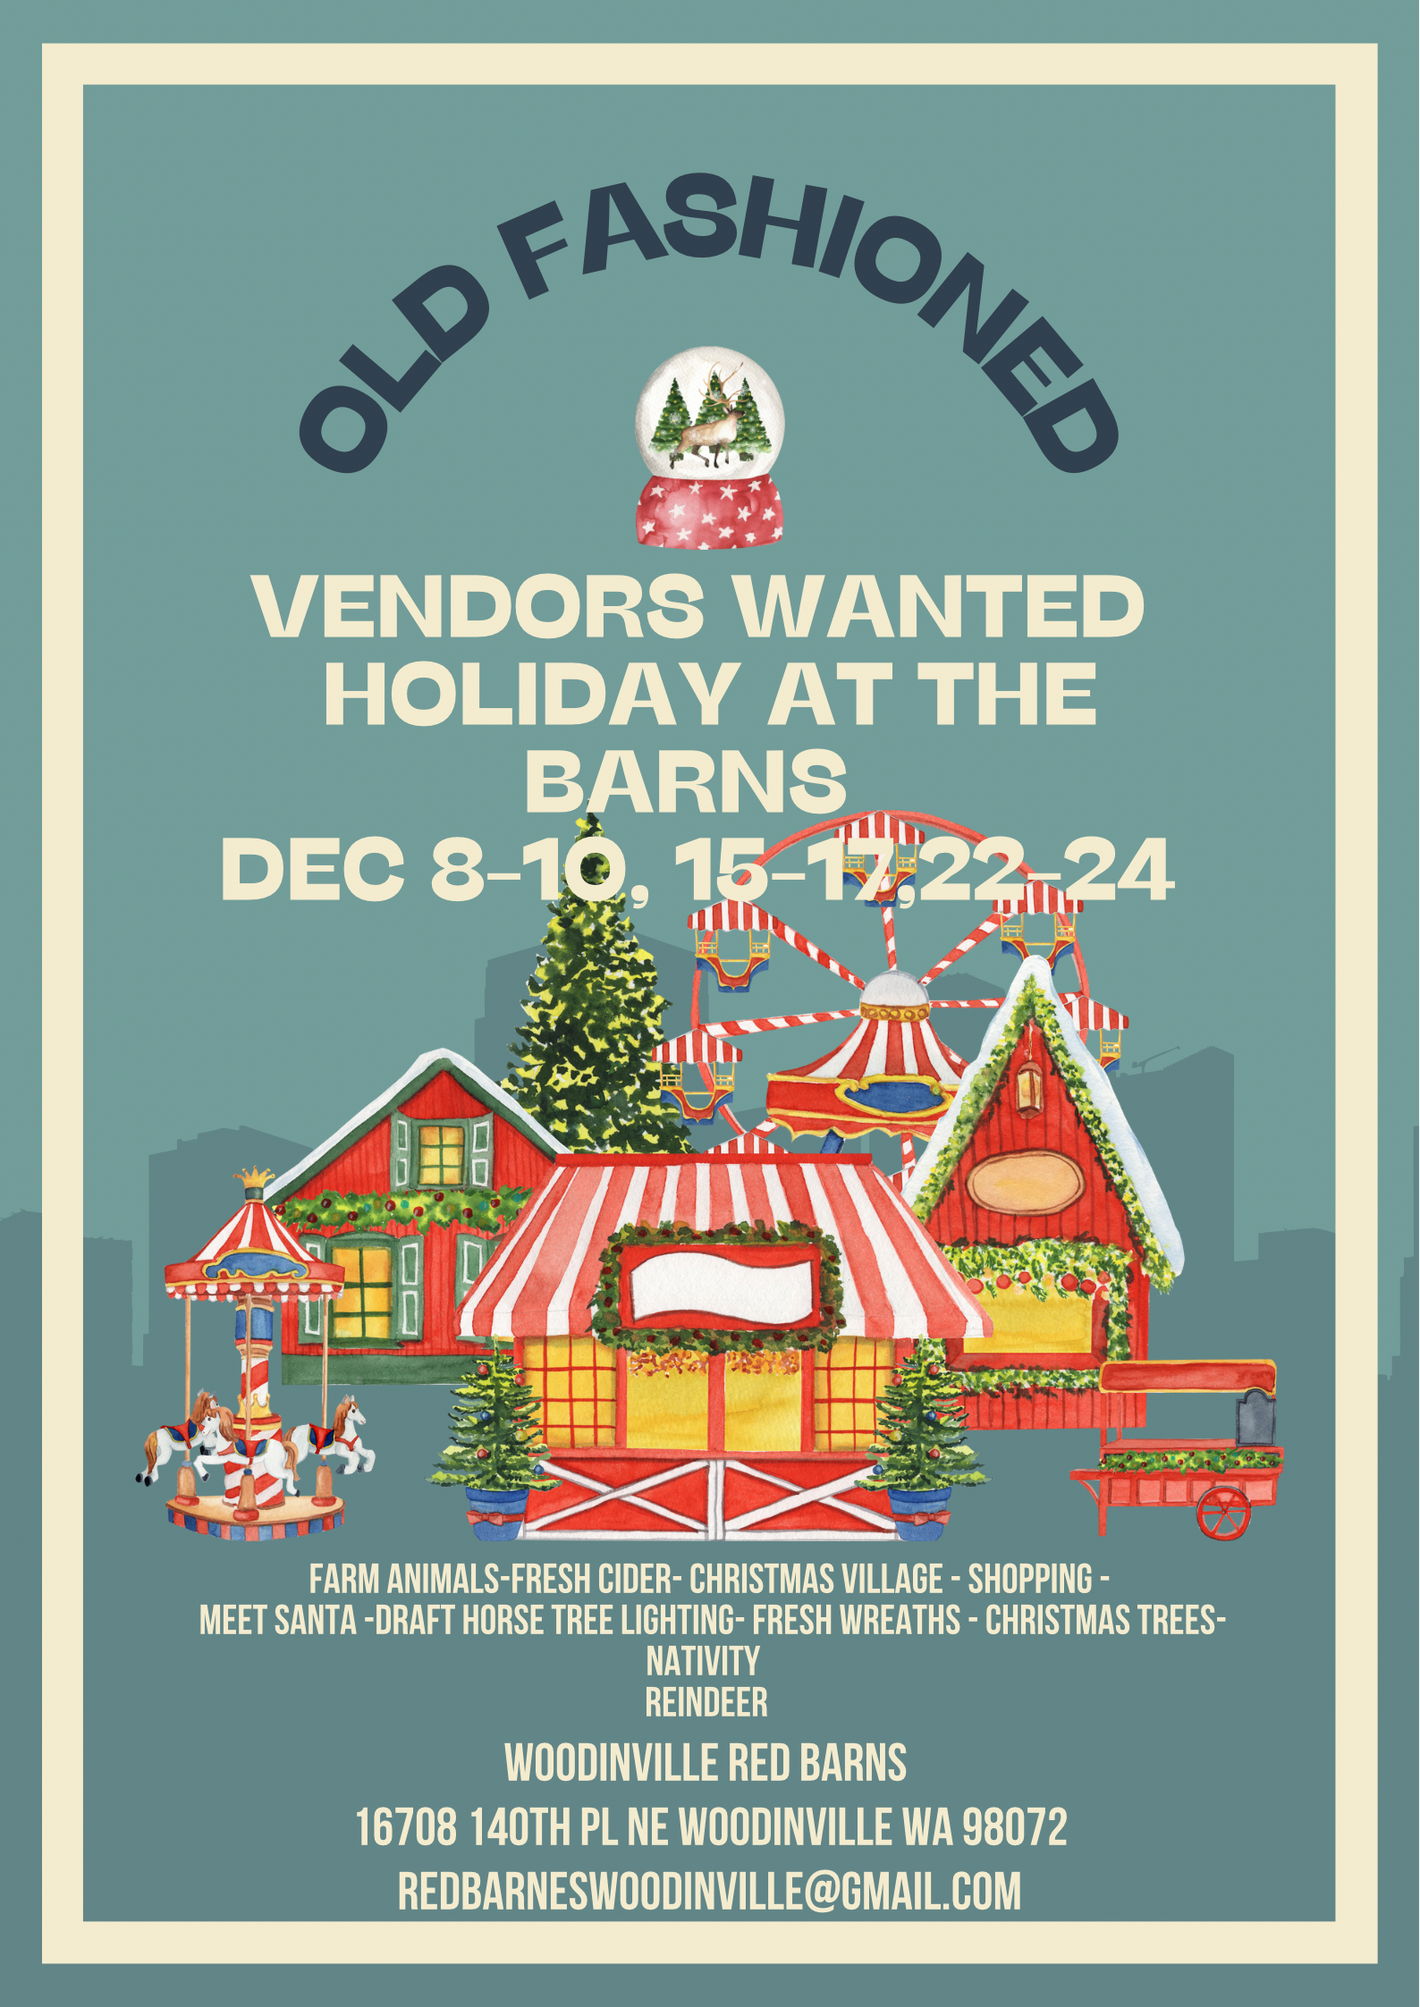 Vendor Booking: Old Fashioned Holidays Dec 15-17th 2023